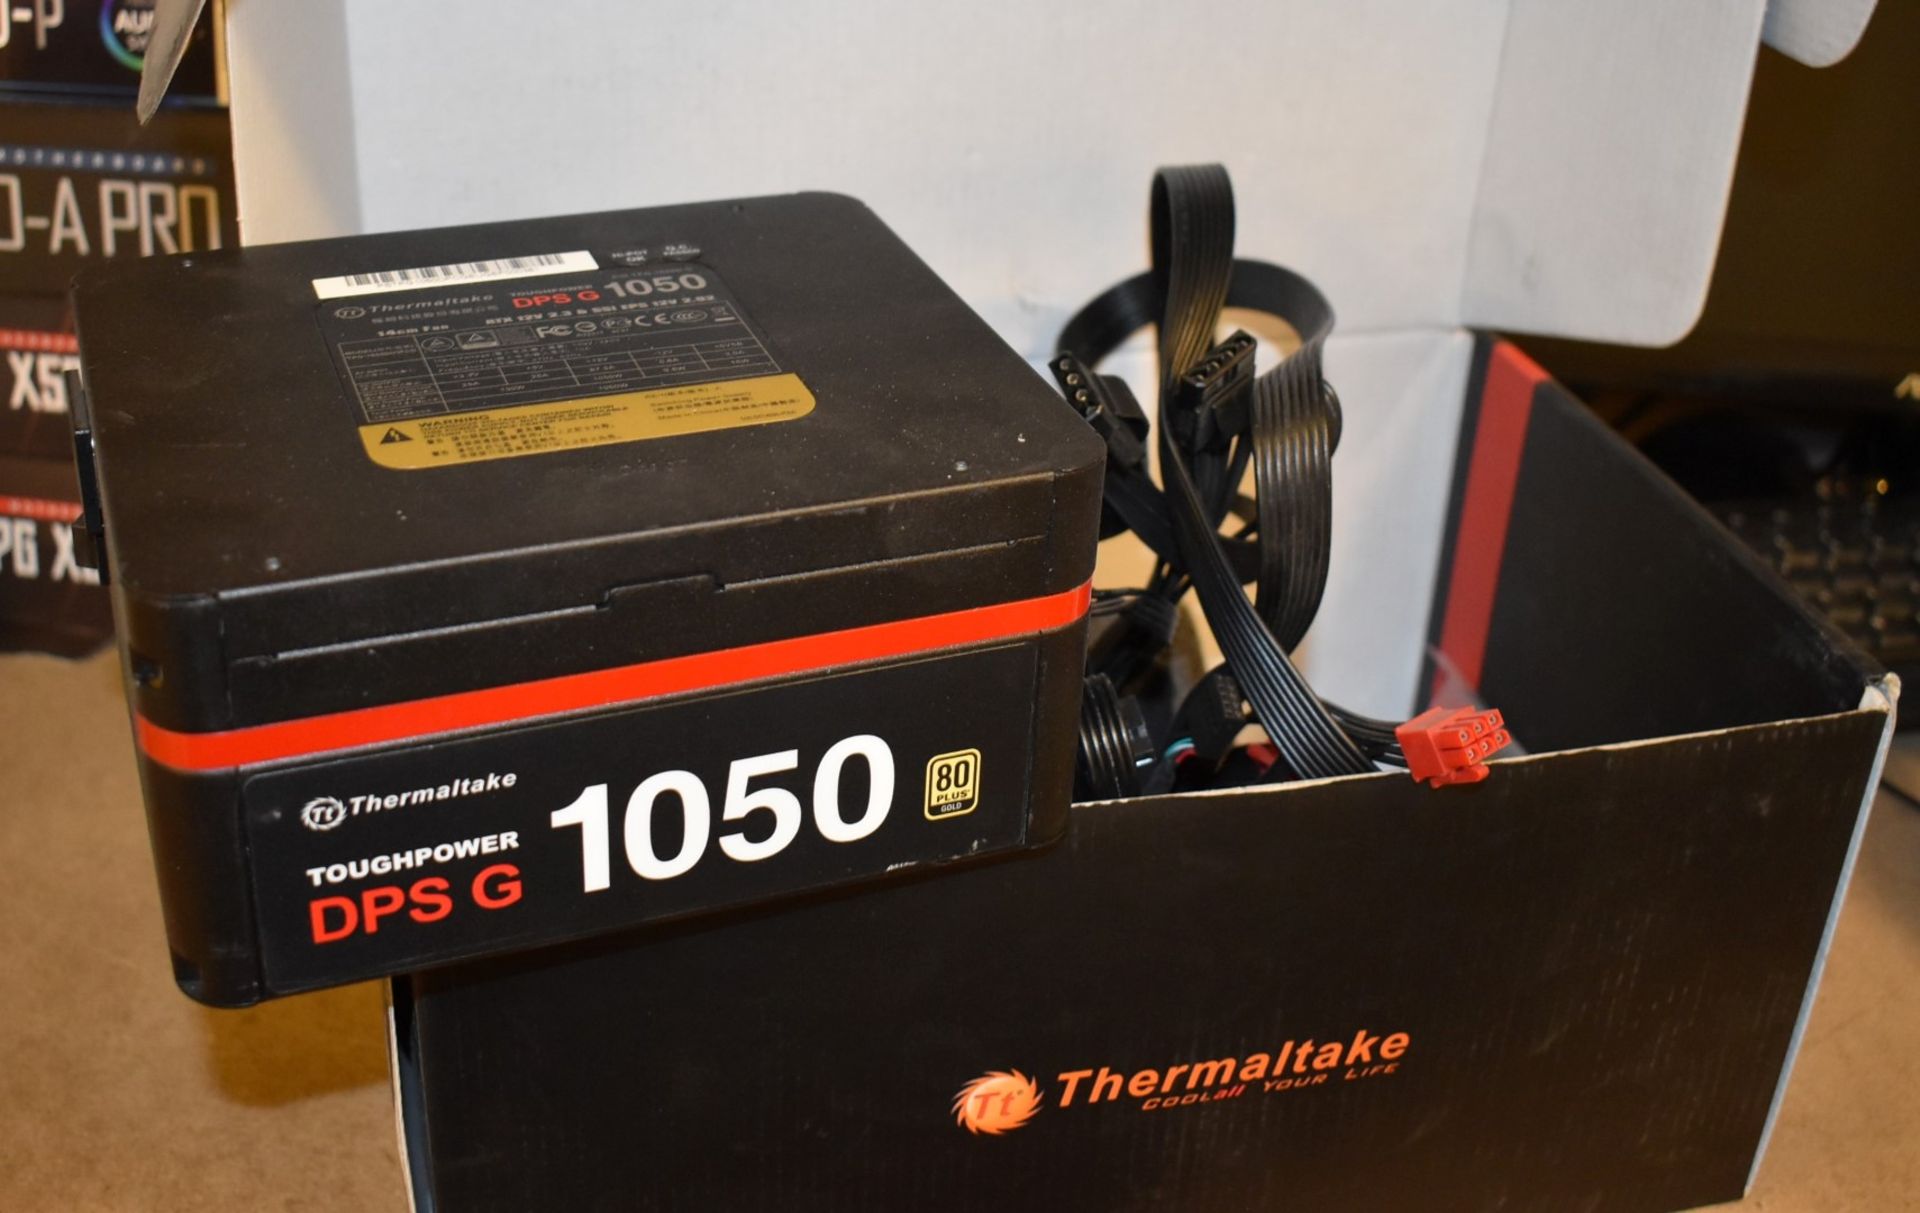 1 x Thermaltake Toughpower DPSG 1050w 80 Plus Gold Modular Power Supply - Boxed With Cables - Image 2 of 4